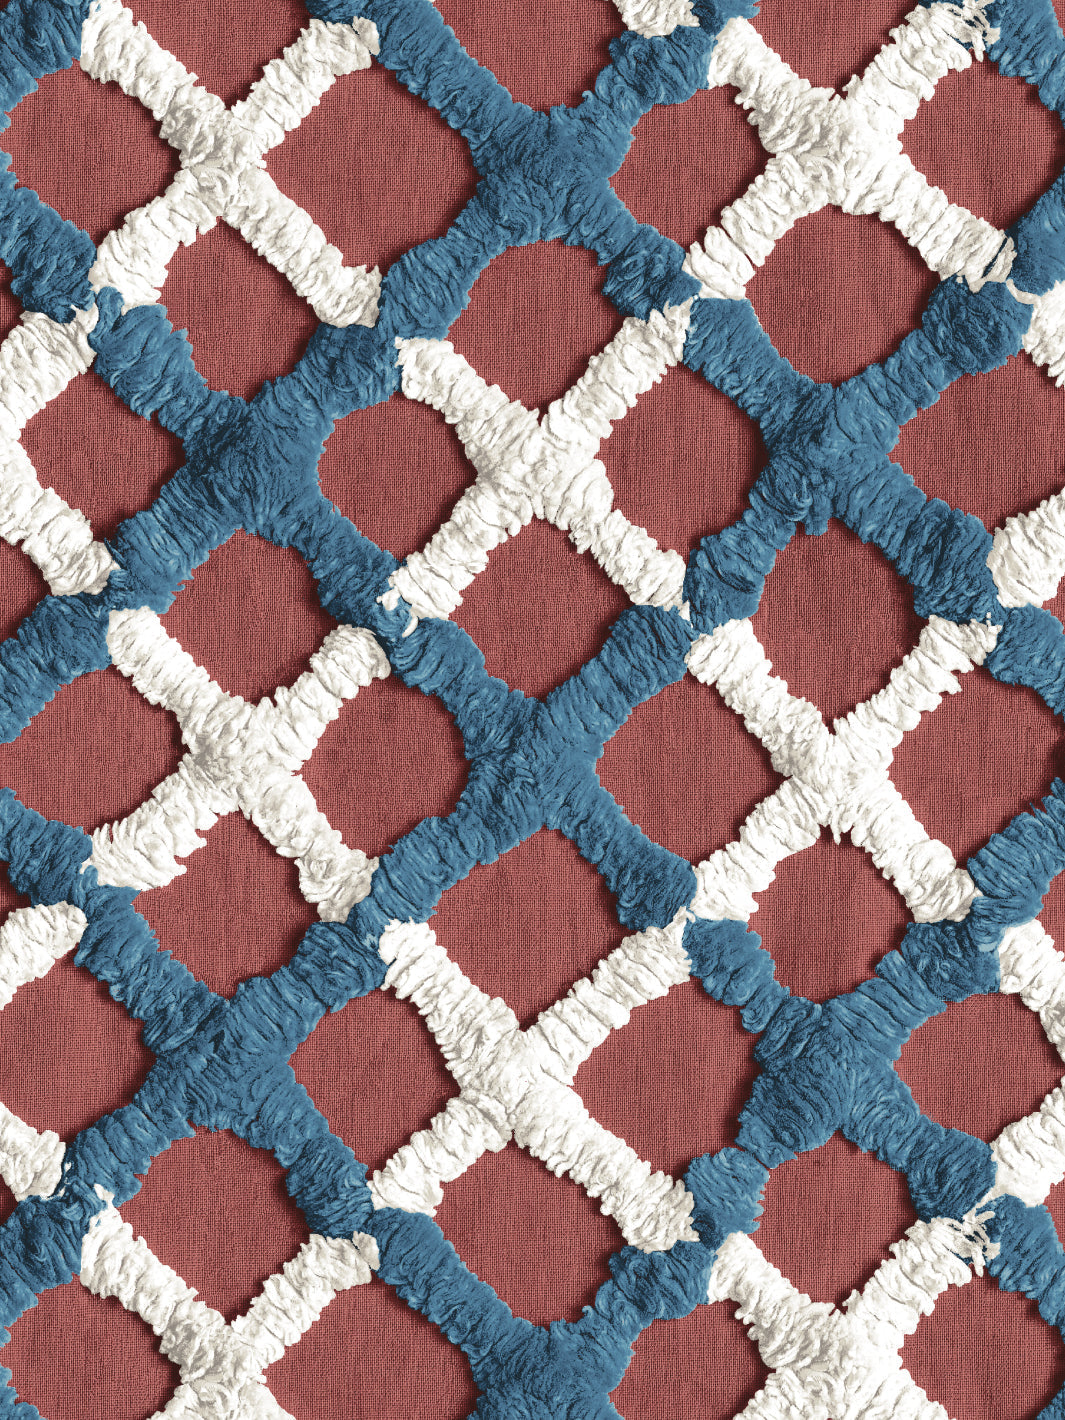 'Chenille Quilt' Wallpaper by Chris Benz - Red Blue + White